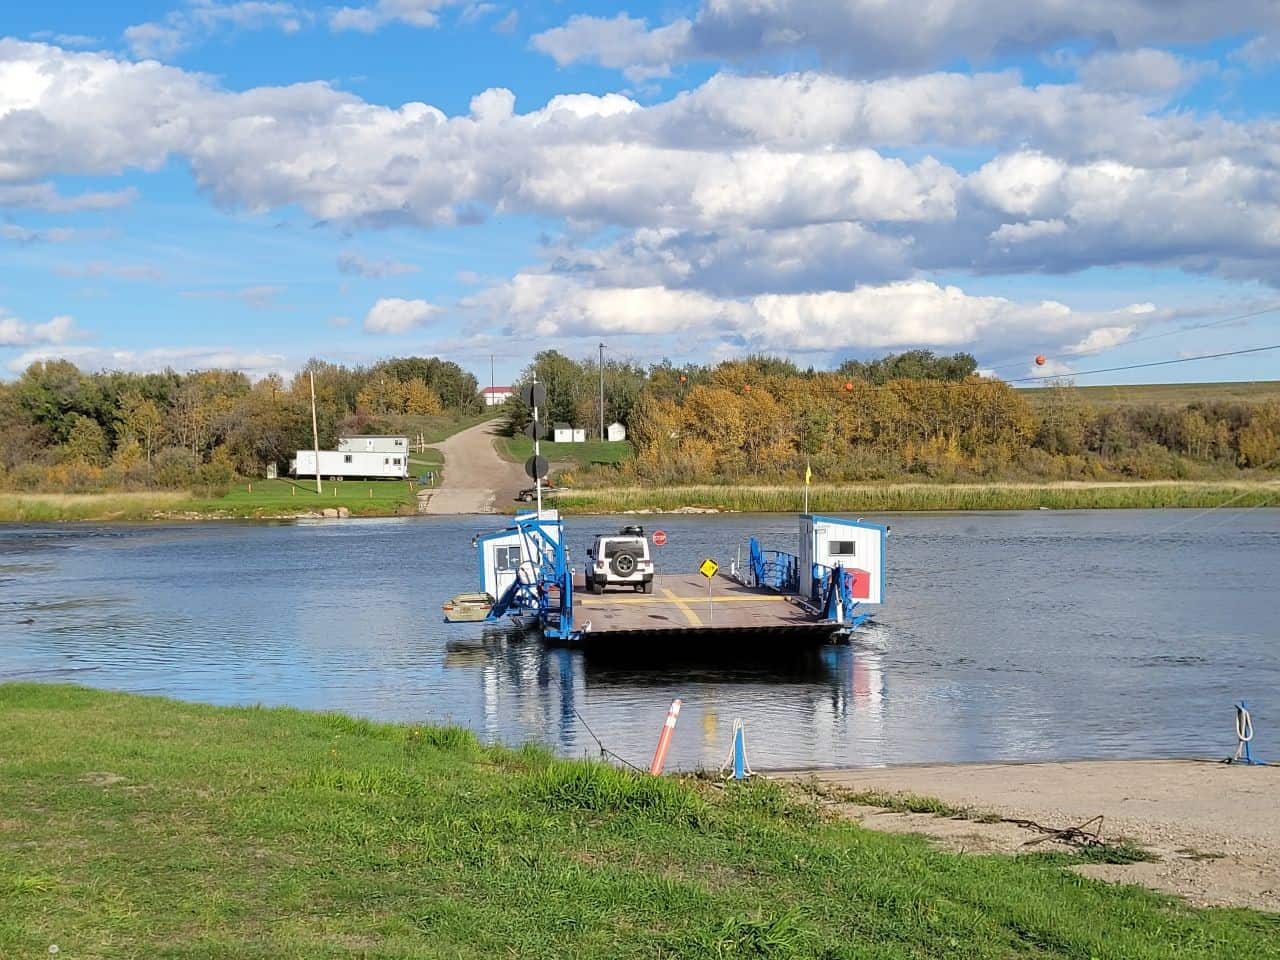 Saskatchewan has 12 river ferries to take commuters across major rivers, and three of these are used by the Northern Trails of Saskatchewan and the Trans Canada Trail.